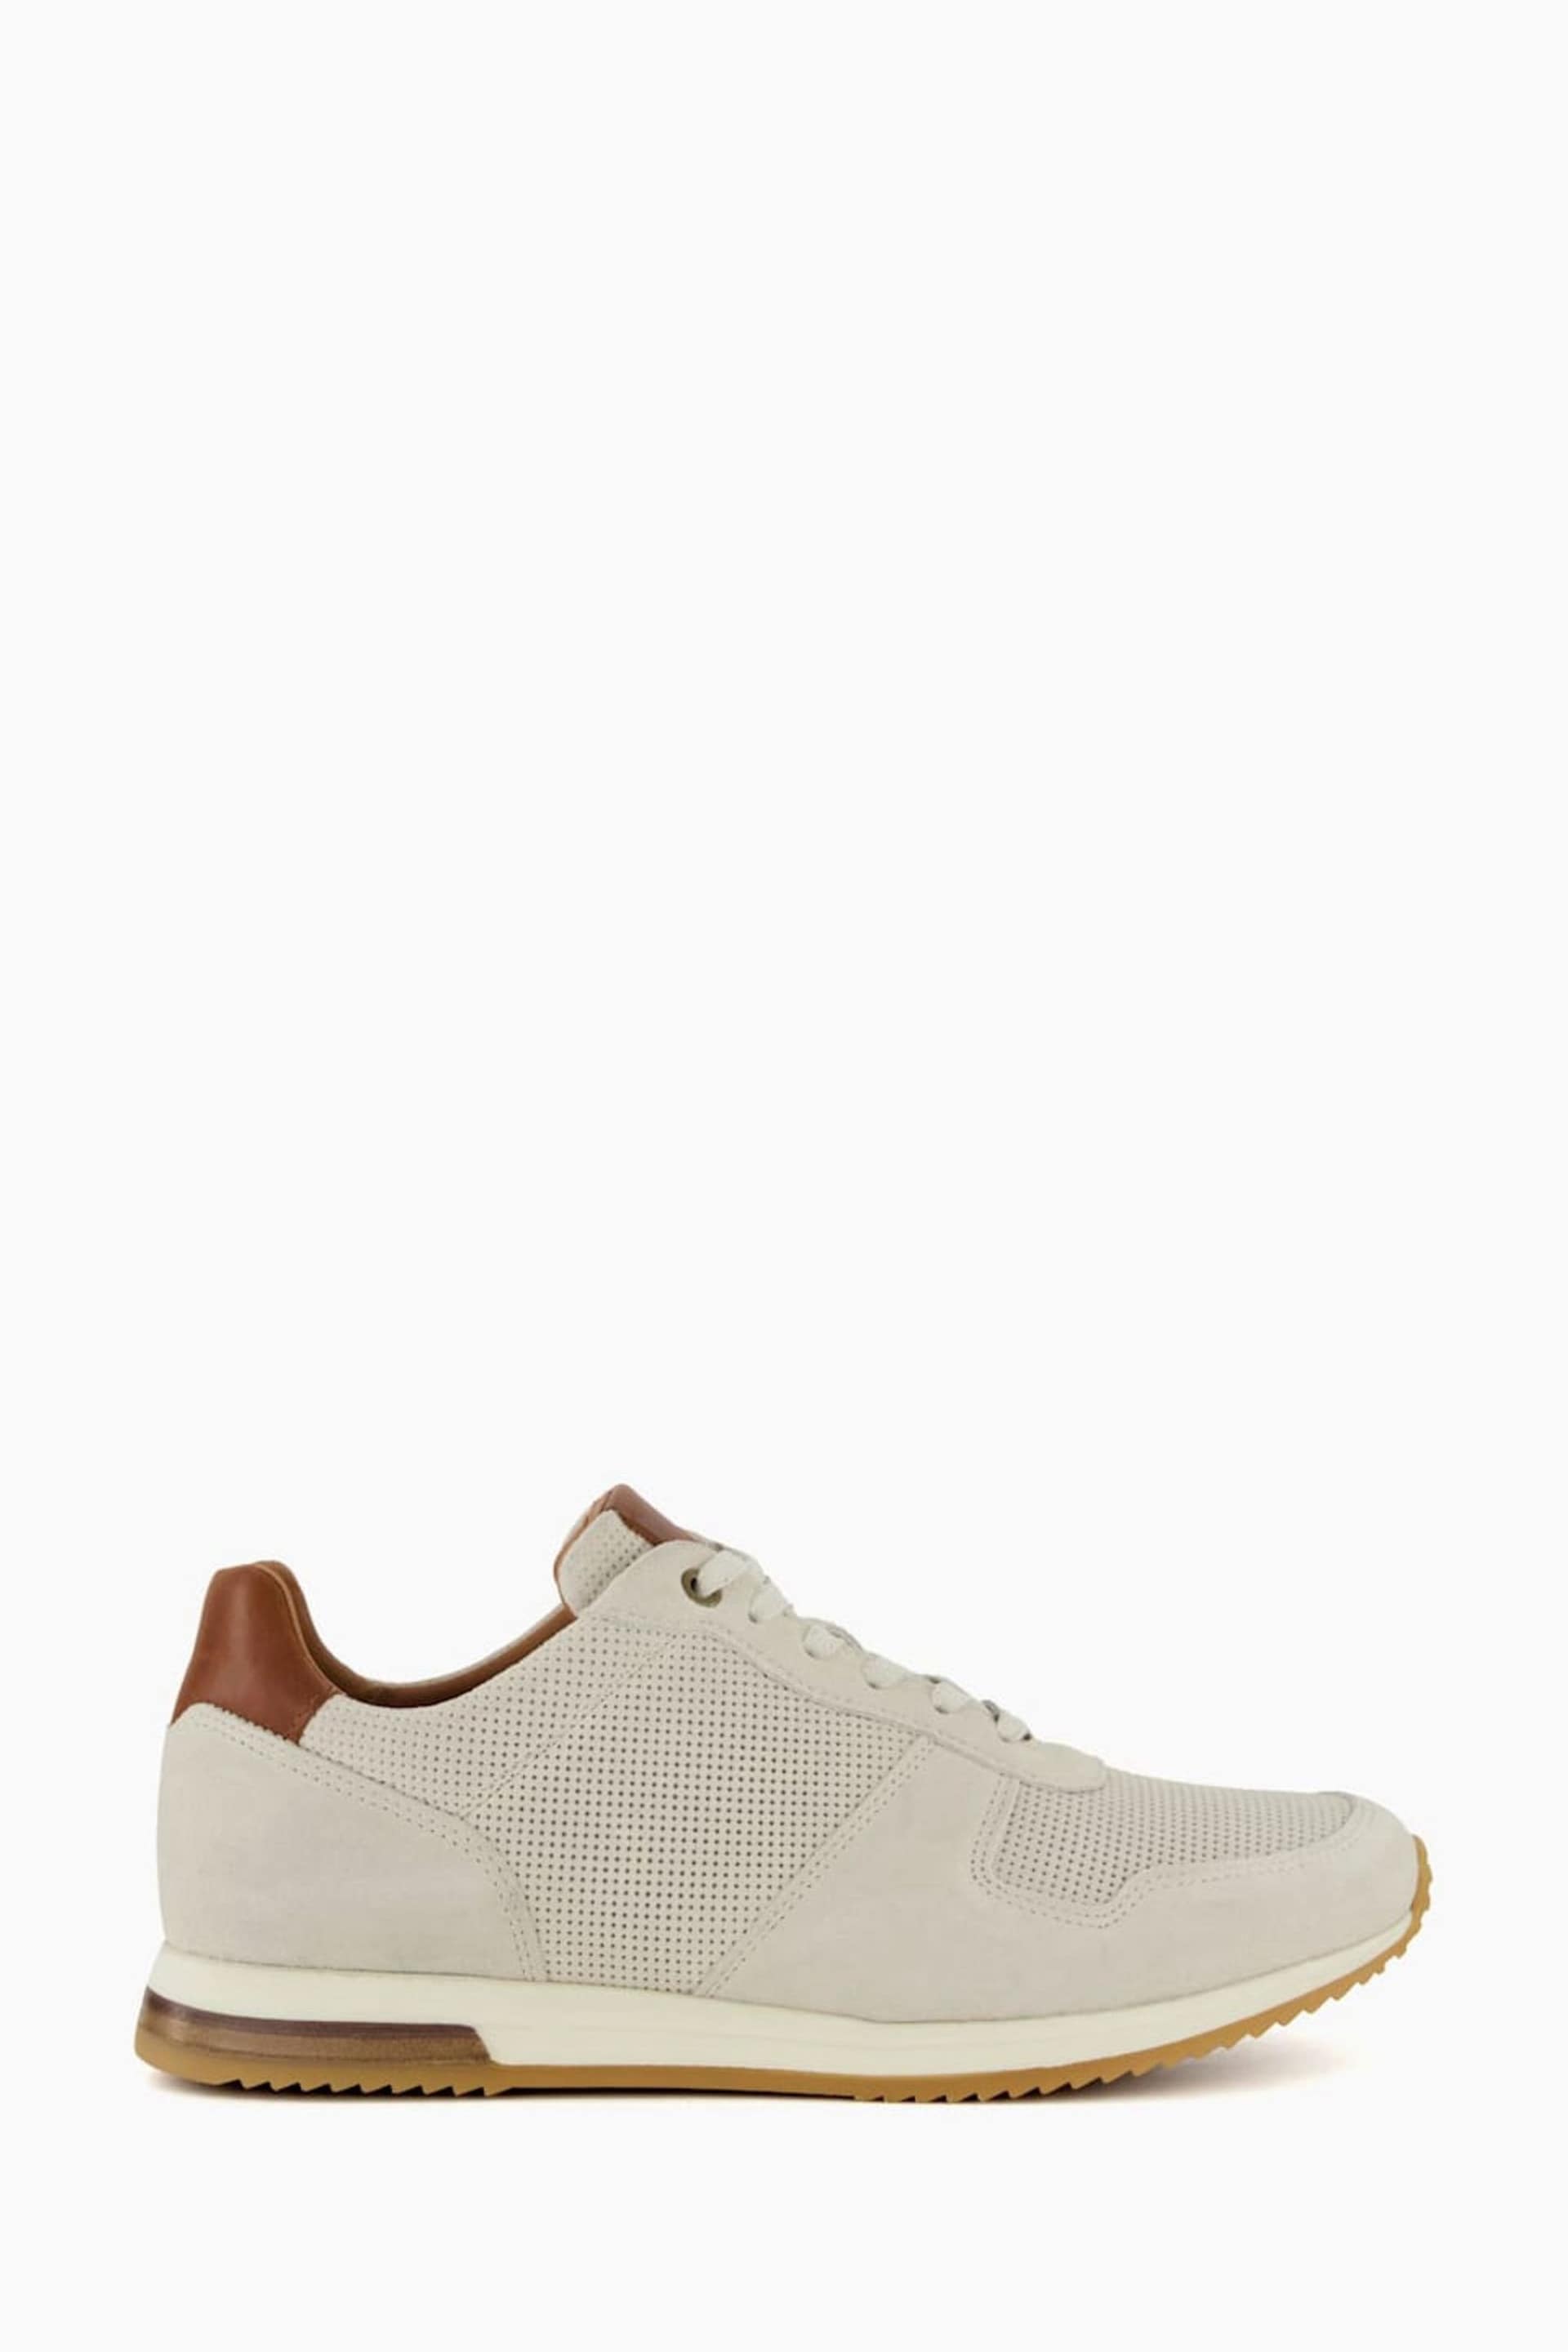 Dune London White Trilogy Perforated Runner Trainers - Image 1 of 5